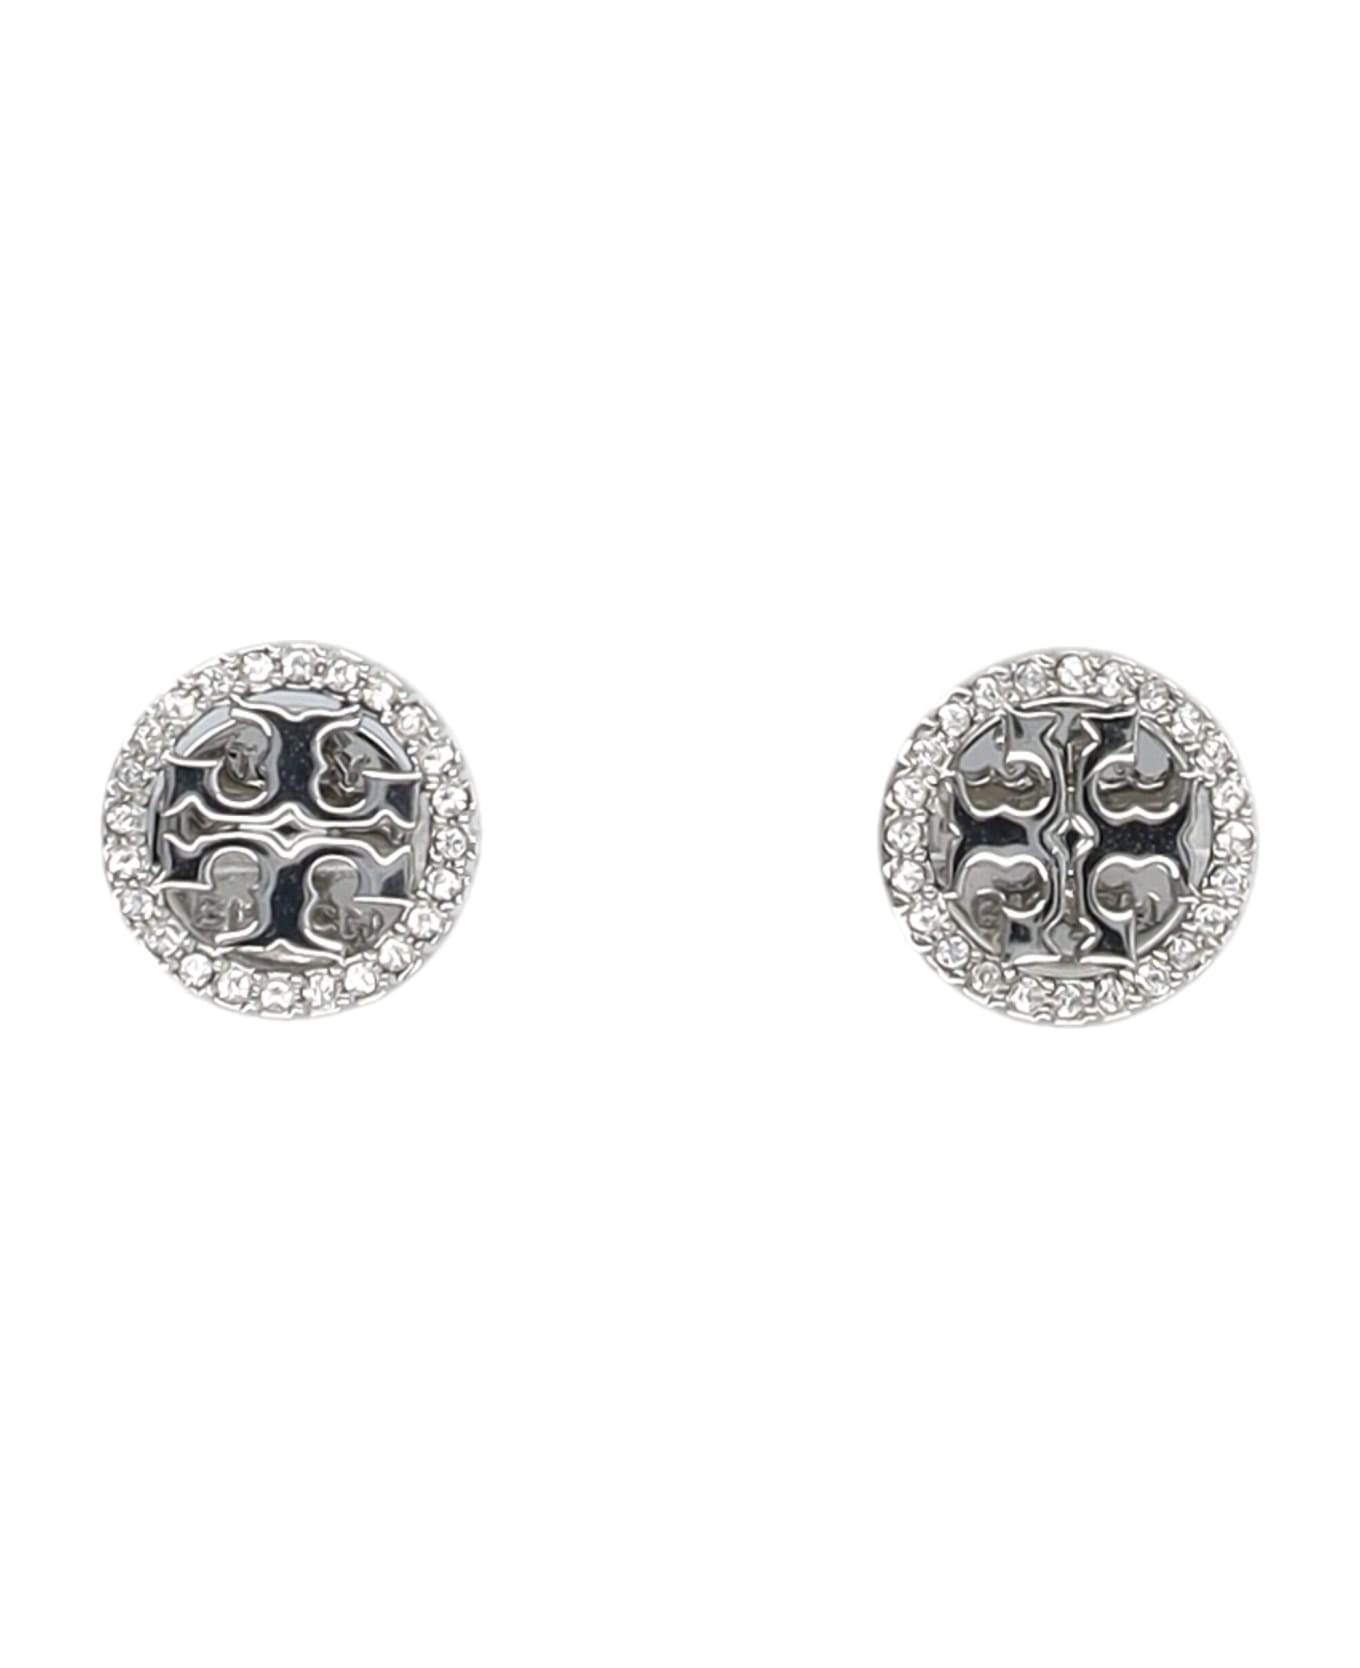 Tory Burch Miller Pave Stud Earring - Tory Silver / Crystal イヤリング